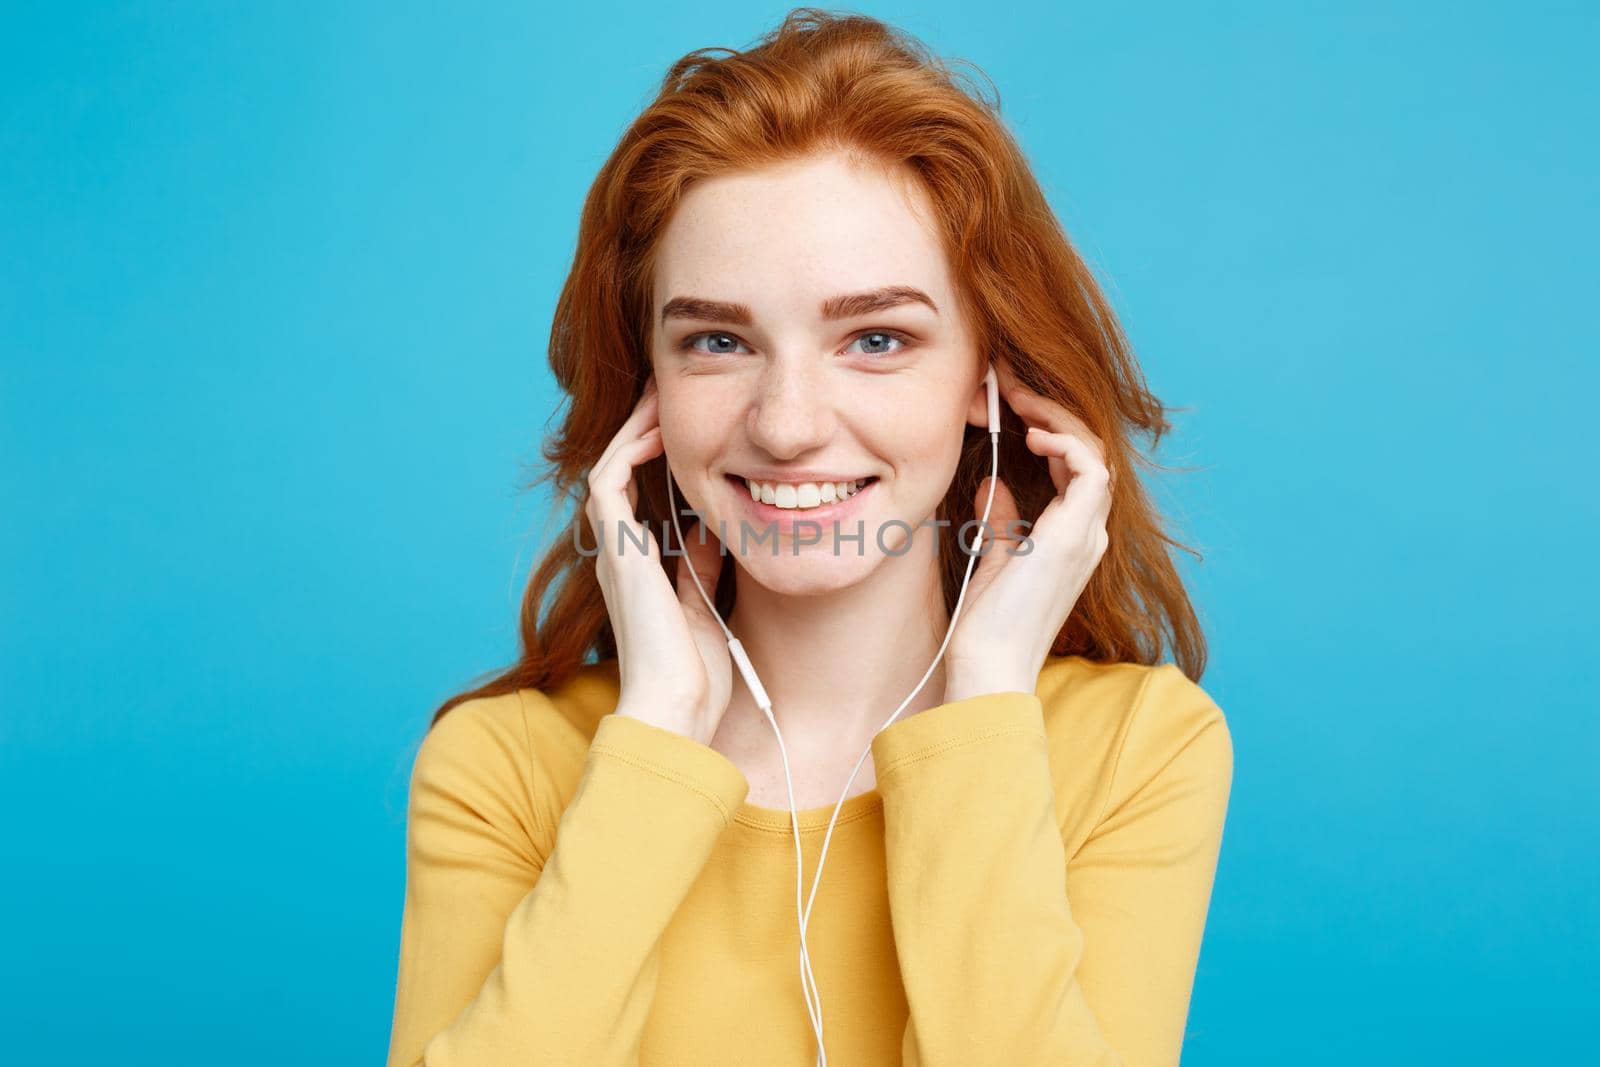 Lifestyle concept - Portrait of cheerful happy ginger red hair girl enjoy listening to music with headphones joyful smiling to camera. Isolated on Blue Pastel Background. Copy space.